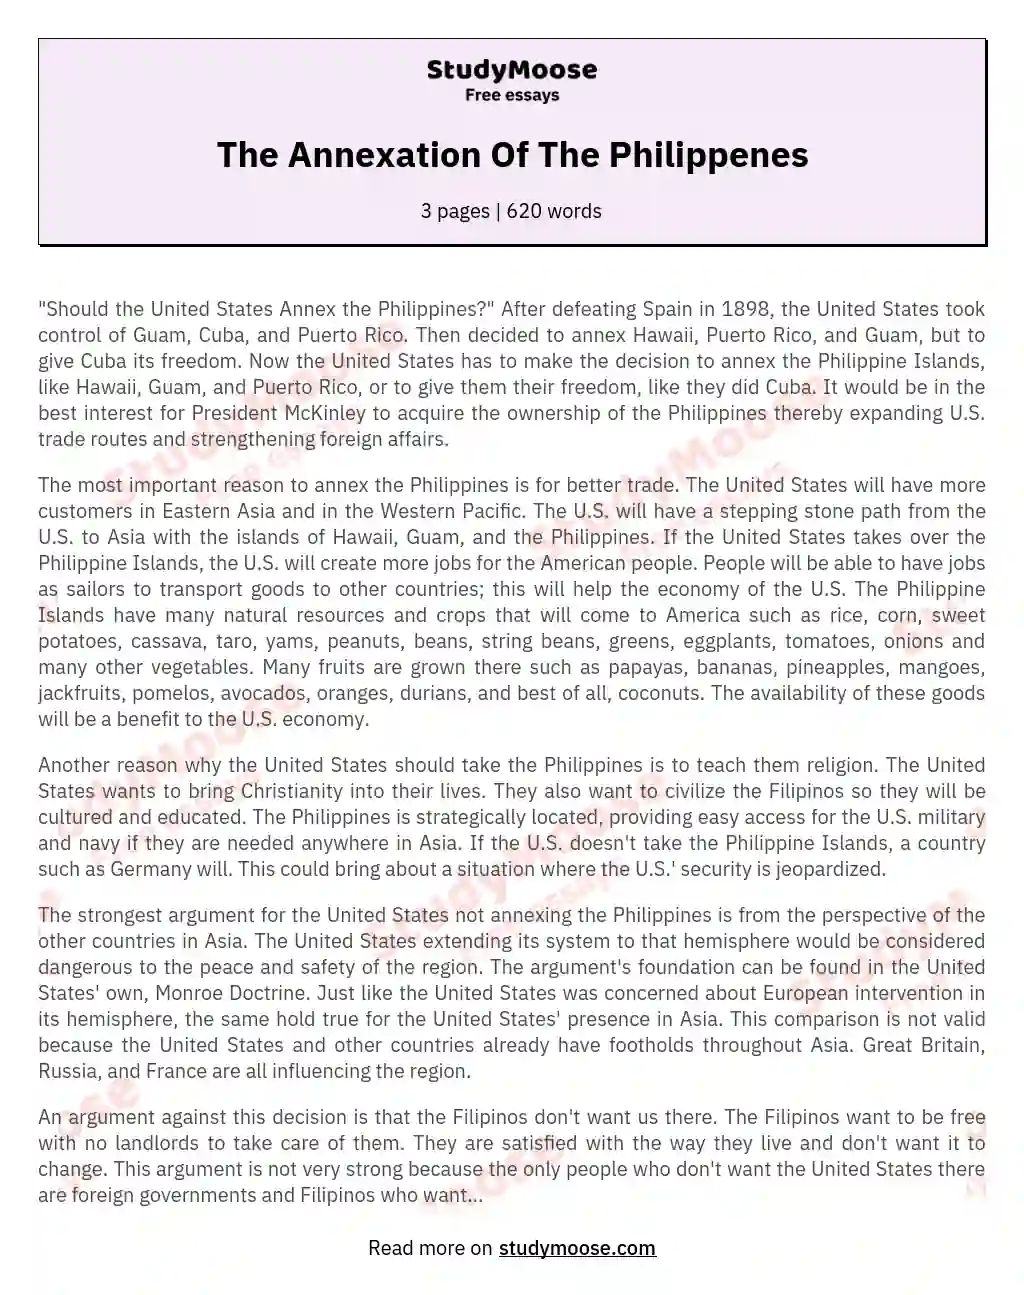 The Annexation Of The Philippenes essay